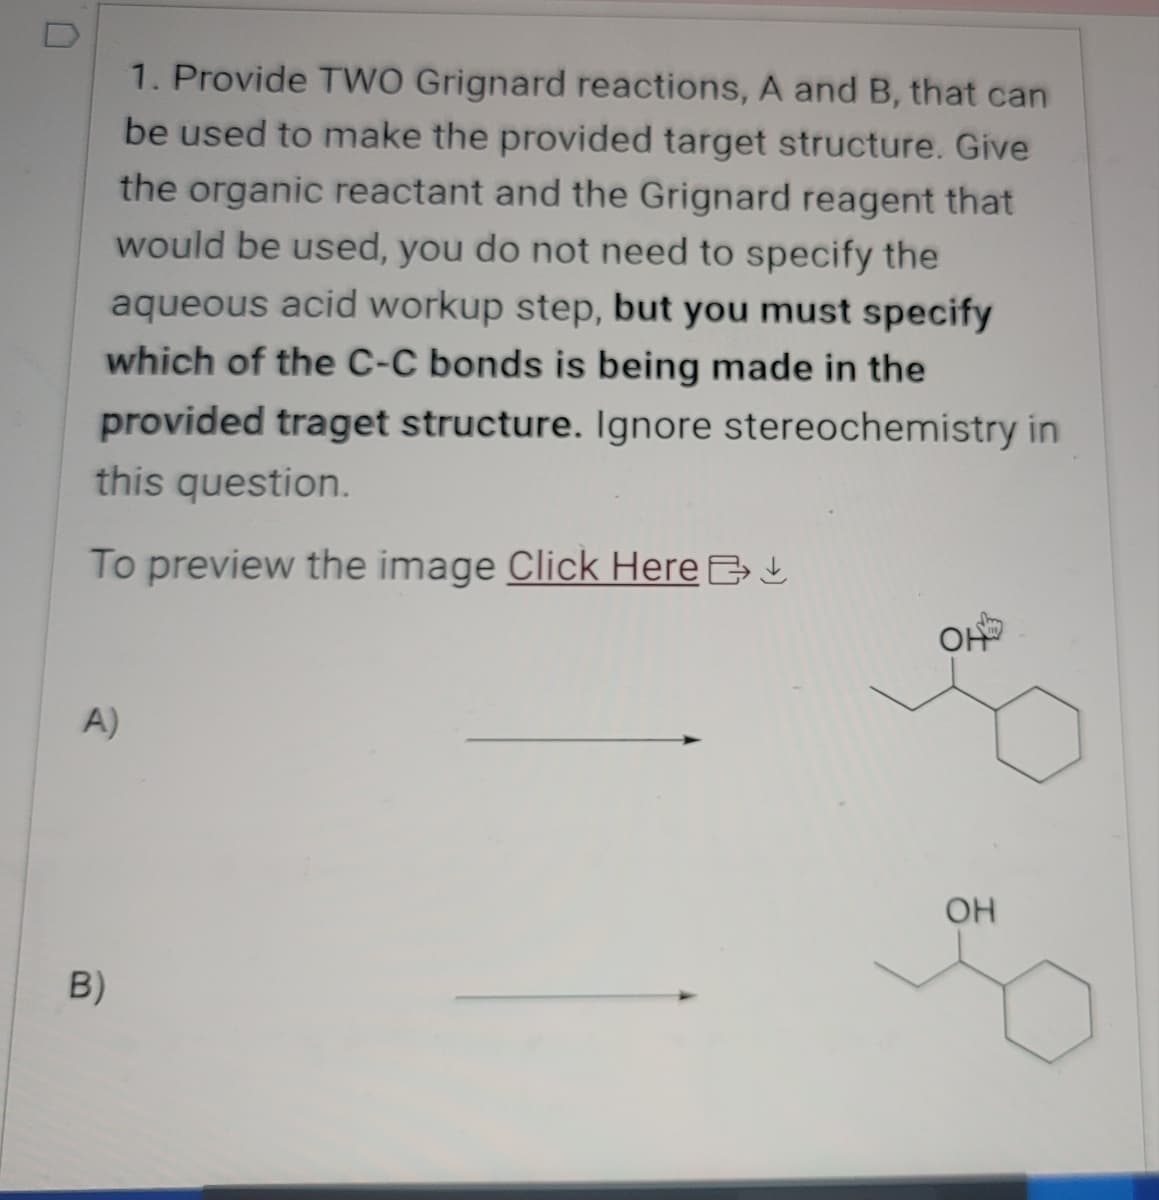 1. Provide TWO Grignard reactions, A and B, that can
be used to make the provided target structure. Give
the organic reactant and the Grignard reagent that
would be used, you do not need to specify the
aqueous acid workup step, but you must specify
which of the C-C bonds is being made in the
provided traget structure. Ignore stereochemistry in
this question.
To preview the image Click Here >
A)
B)
HO
OH